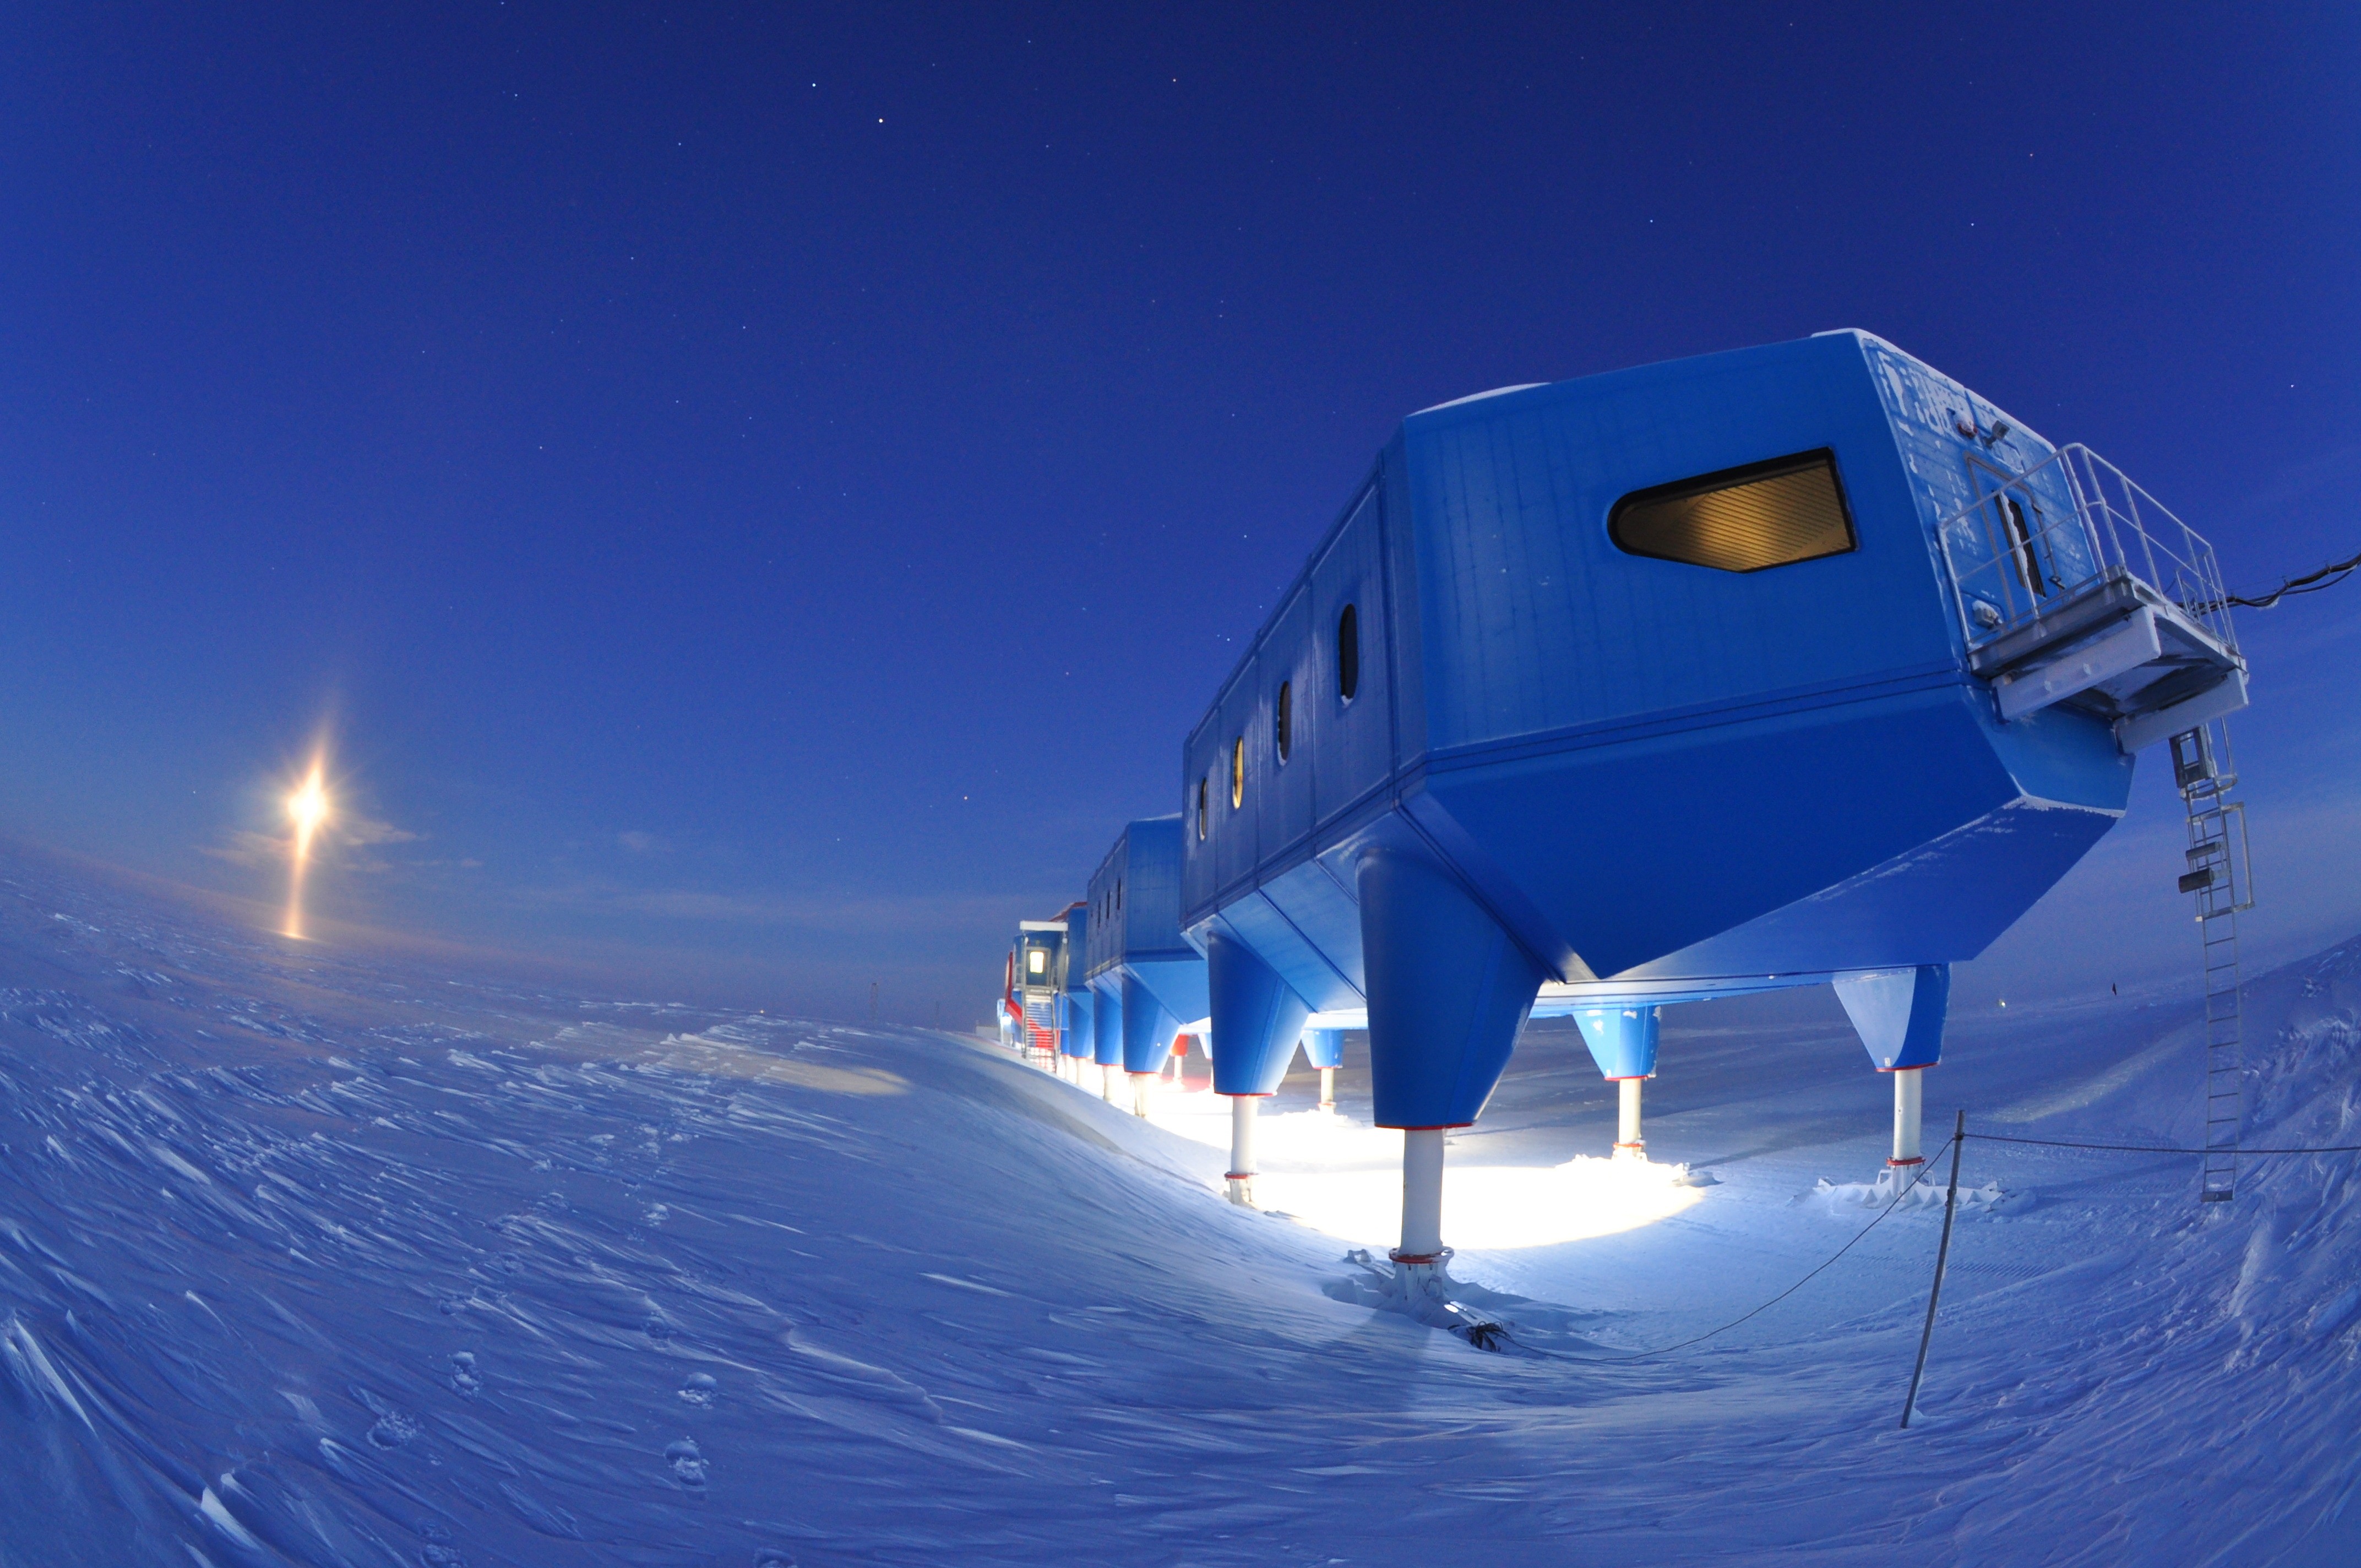 nature, Landscape, Concordia Research Station, Antarctica, Snow, Ice, Evening, Science, Technology, Laboratories, Building, Moon, Moonlight, Clear sky, Fisheye lens, Lights Wallpaper